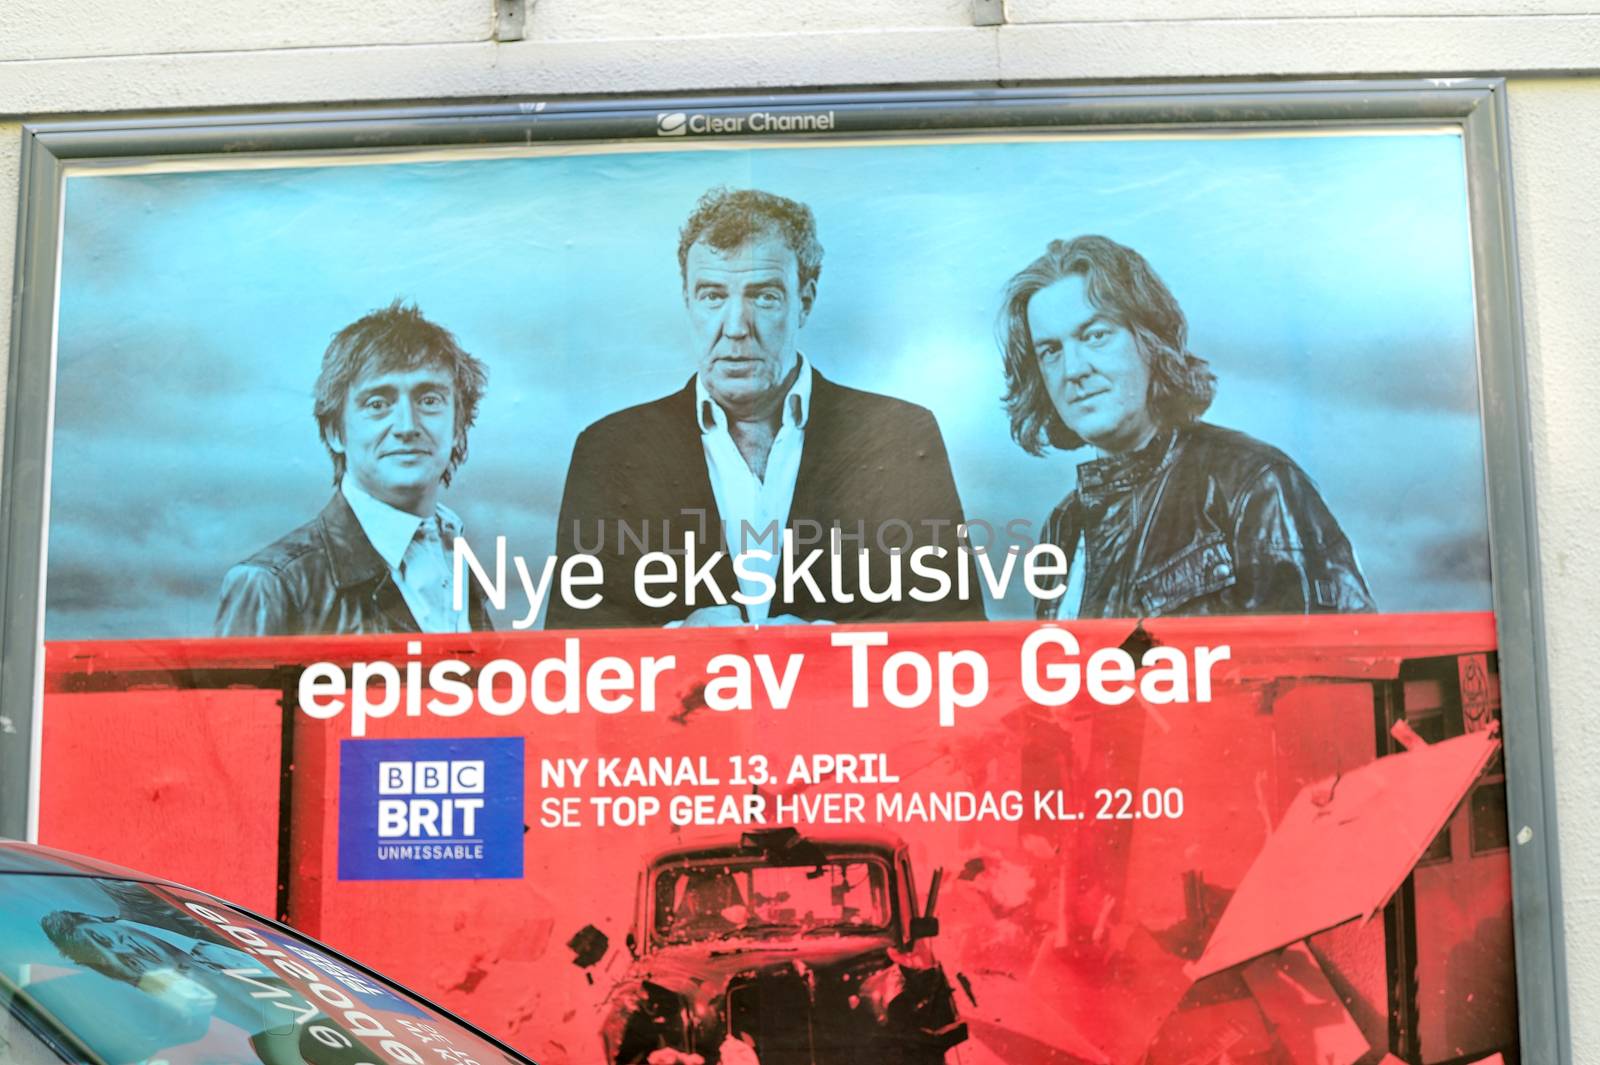 Norwegian Poster fot the Cancelled BBC Top Gear Production Road Shows Stavanger Norway